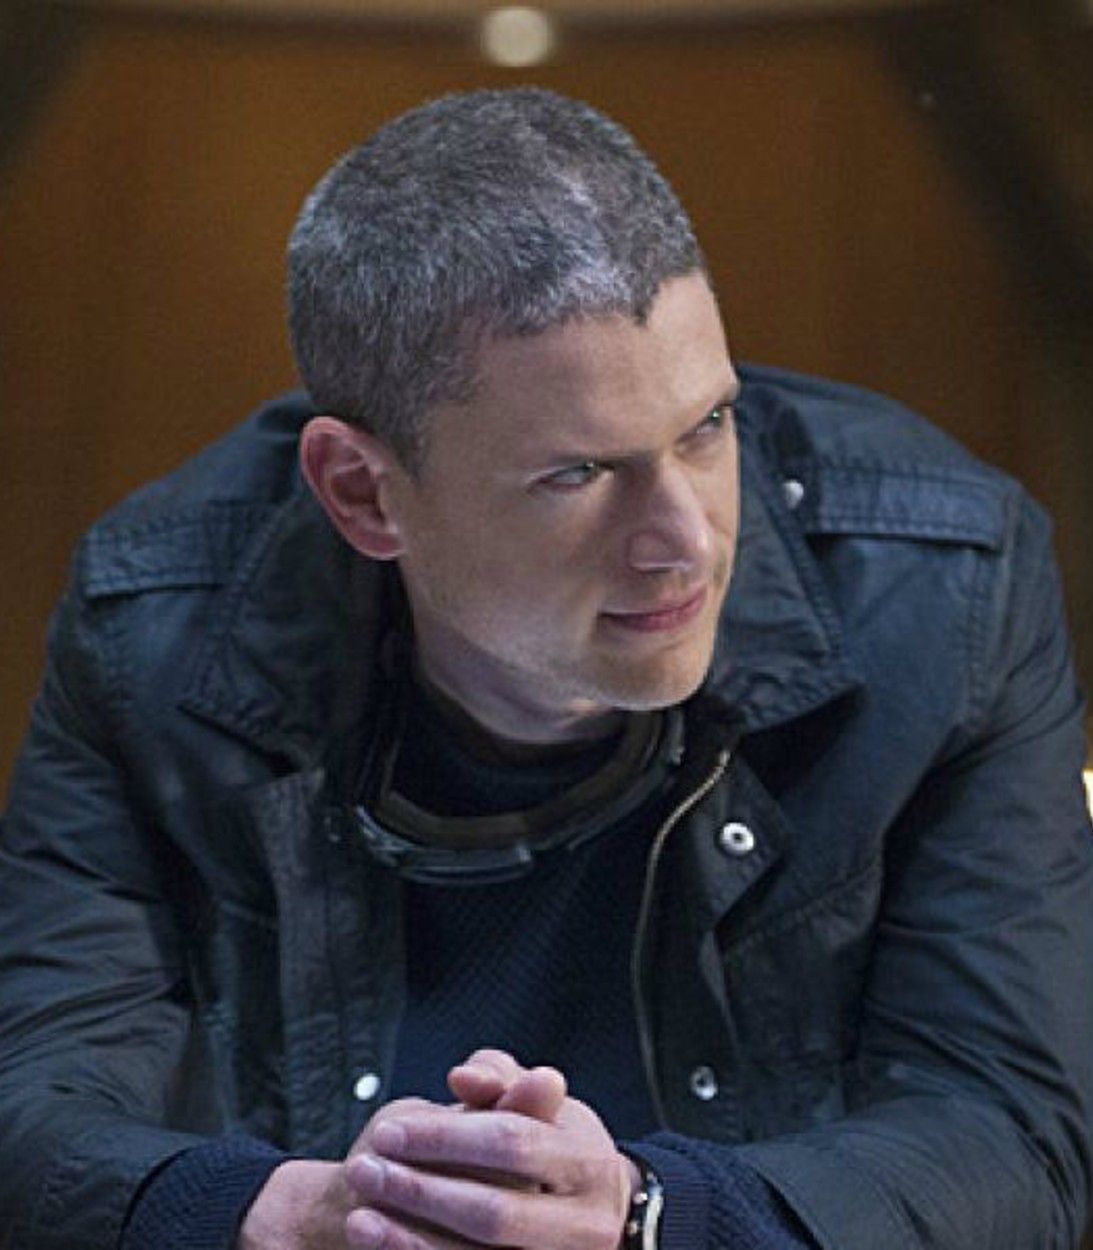 Legends of Tomorrow Captain Cold pic vertical